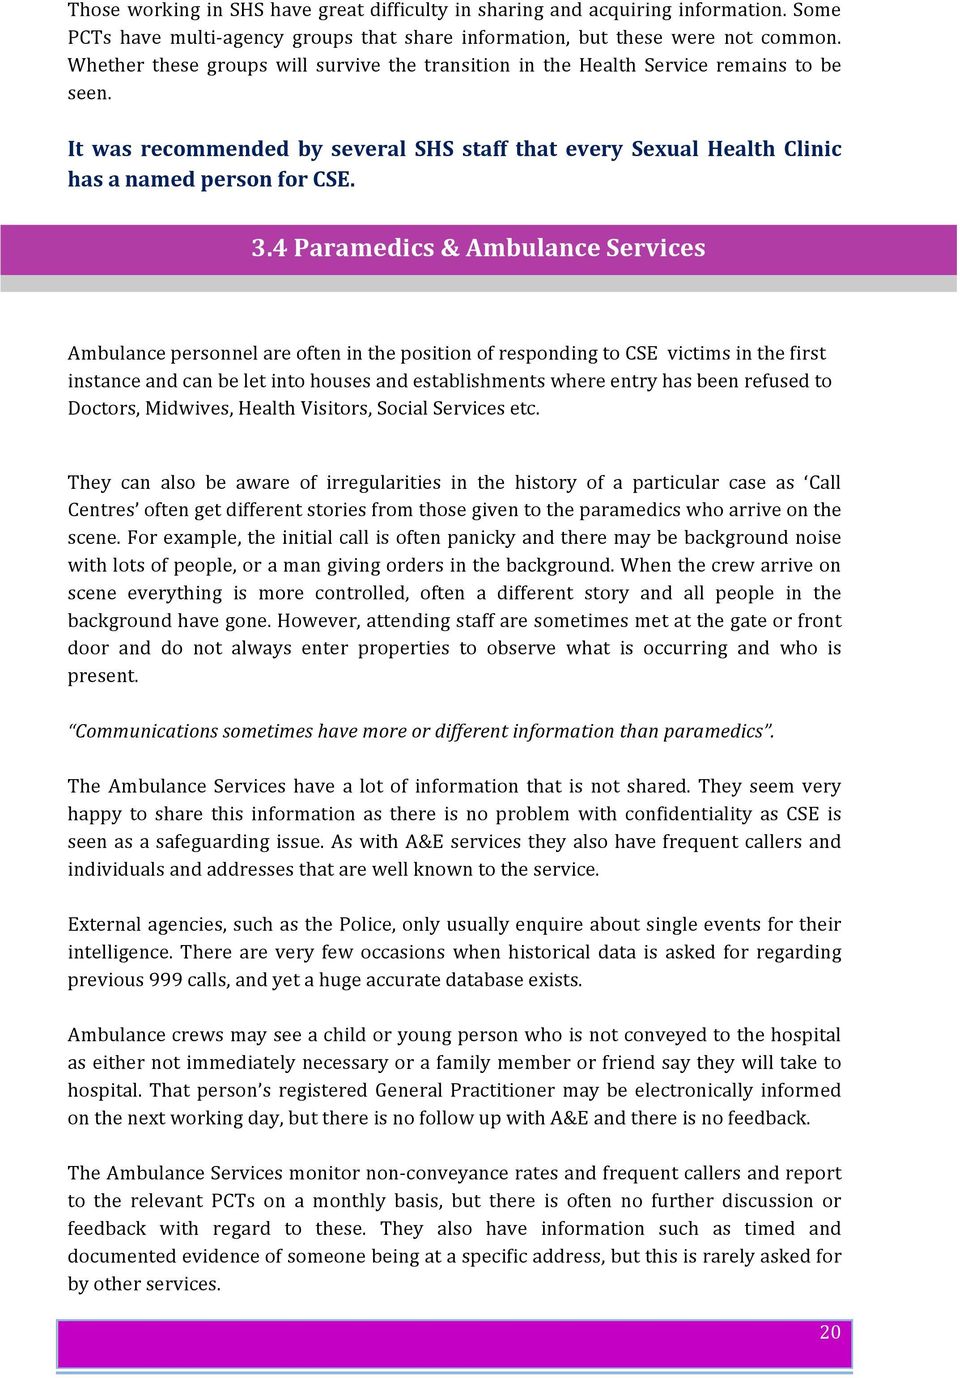 4 Paramedics & Ambulance Services Ambulance personnel are often in the position of responding to CSE victims in the first instance and can be let into houses and establishments where entry has been